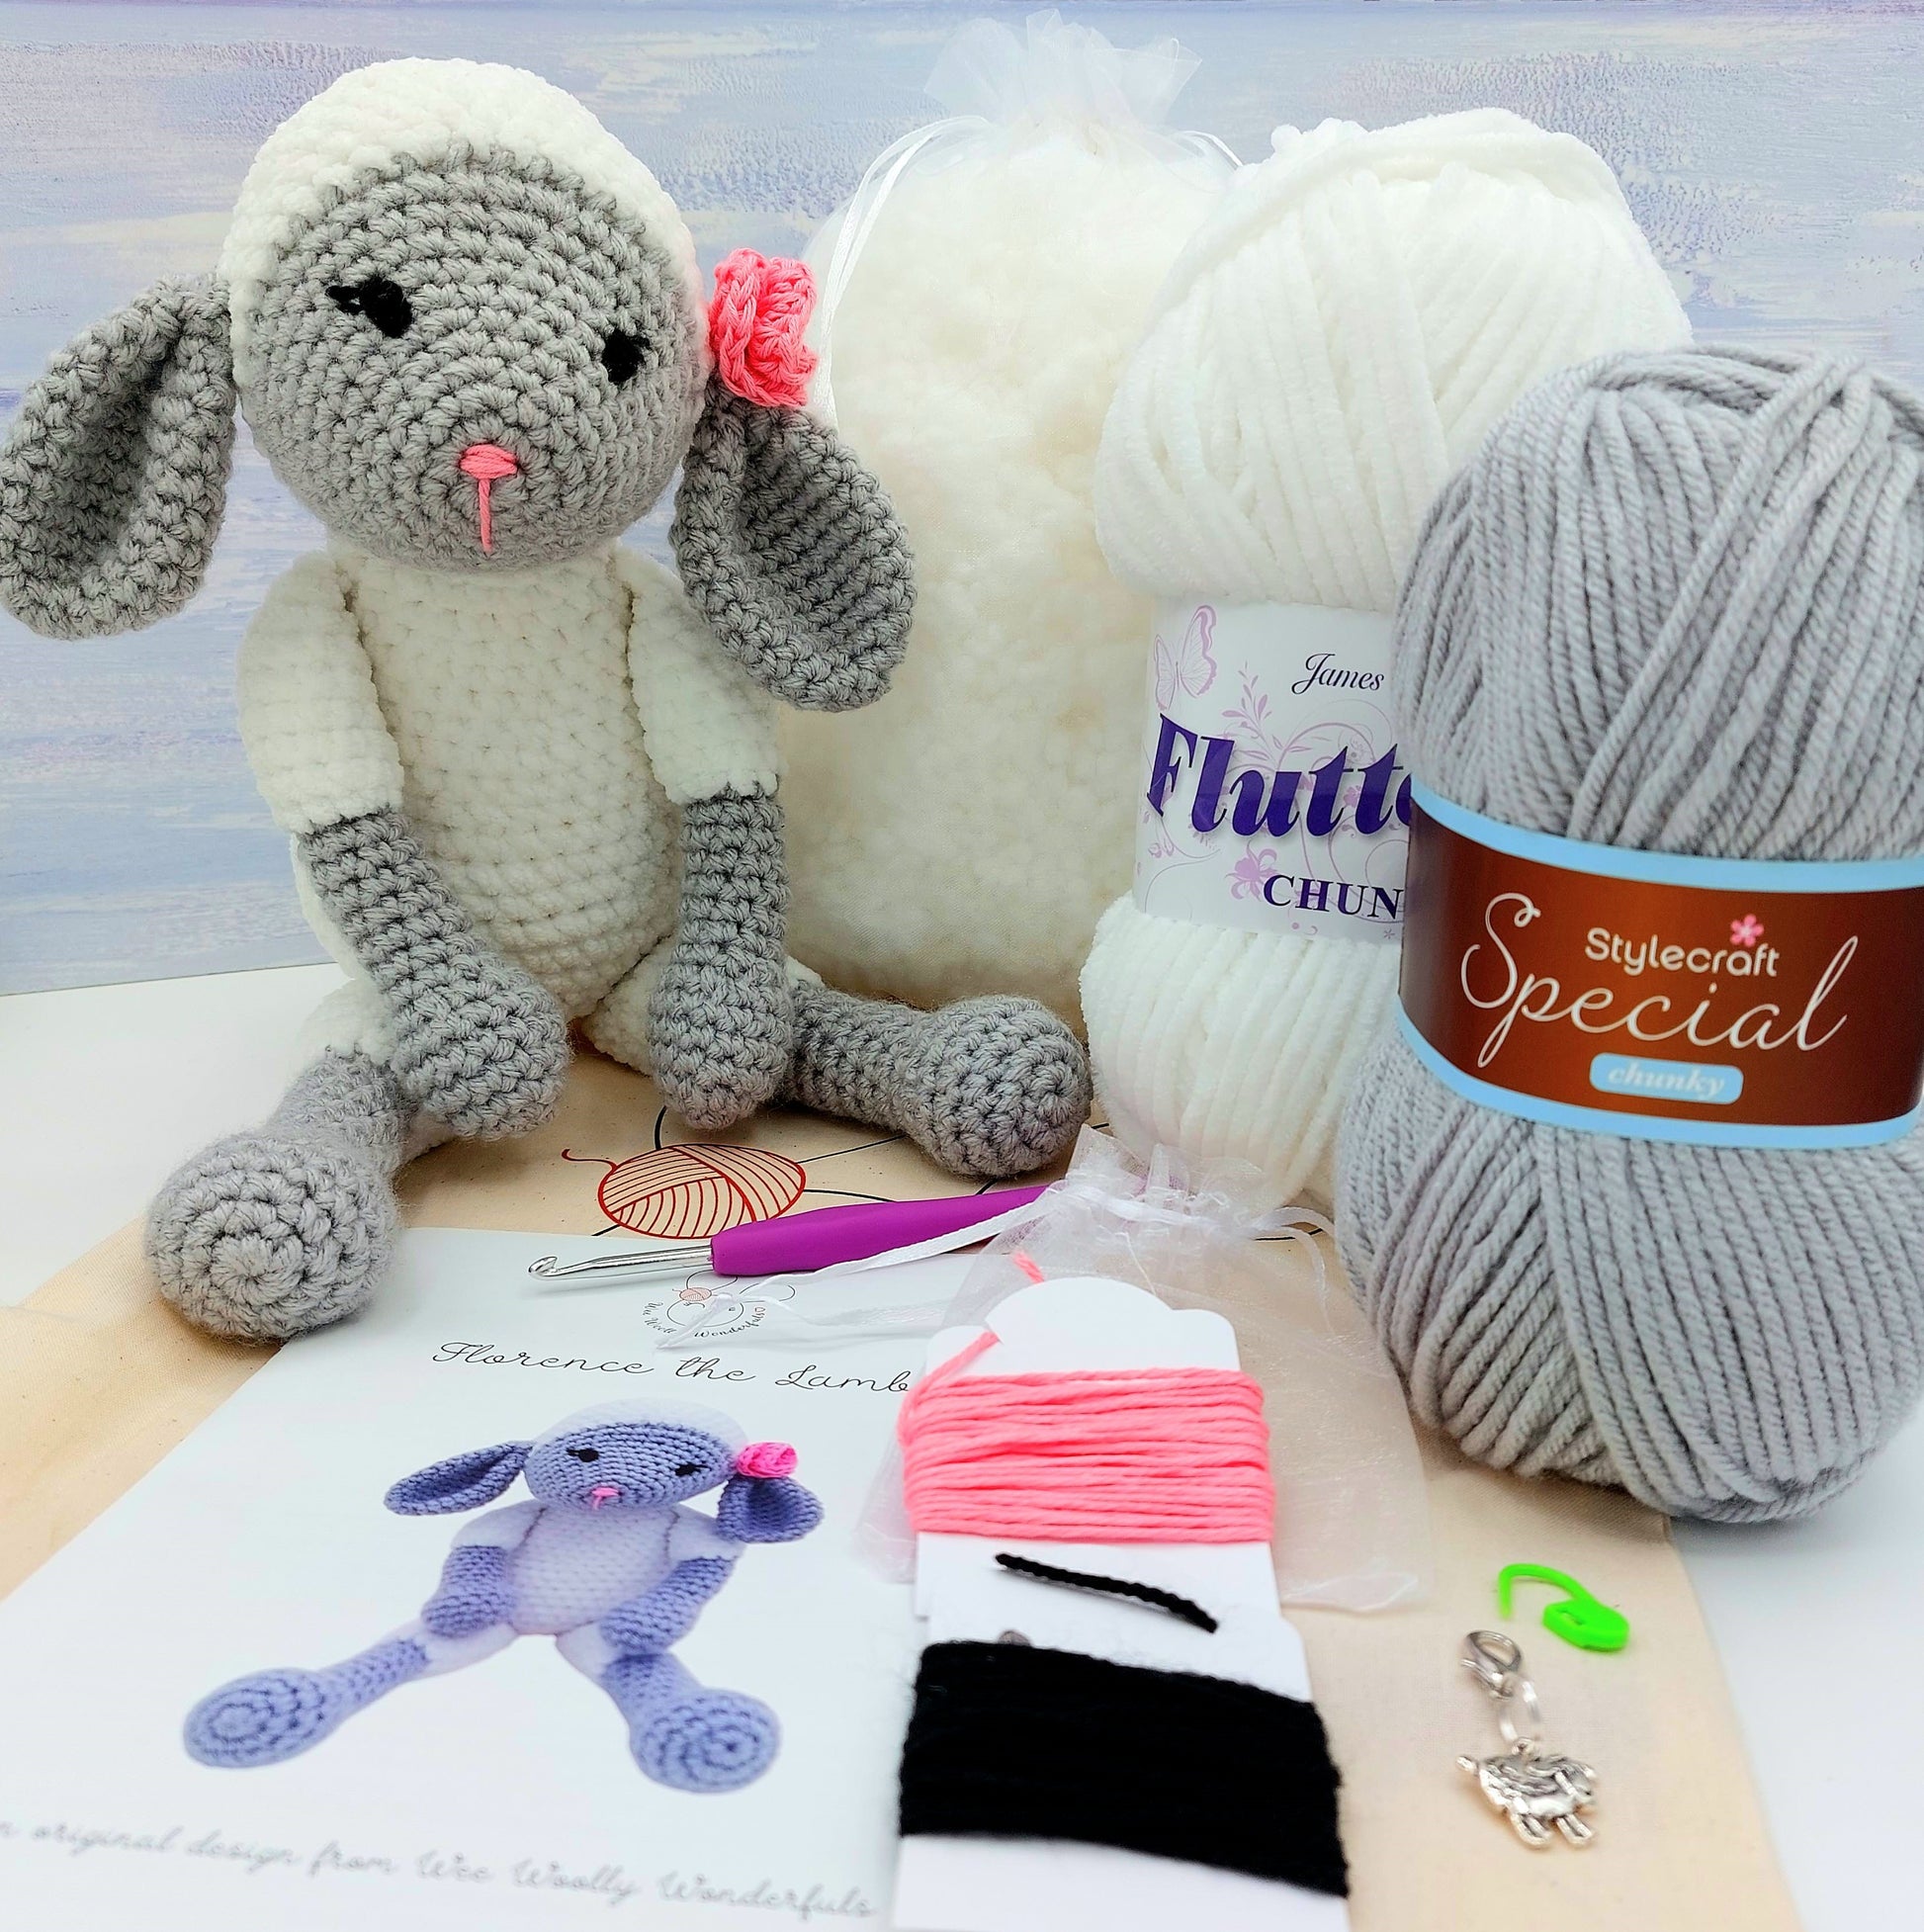 Lamb crochet kit contents including pattern and yarn